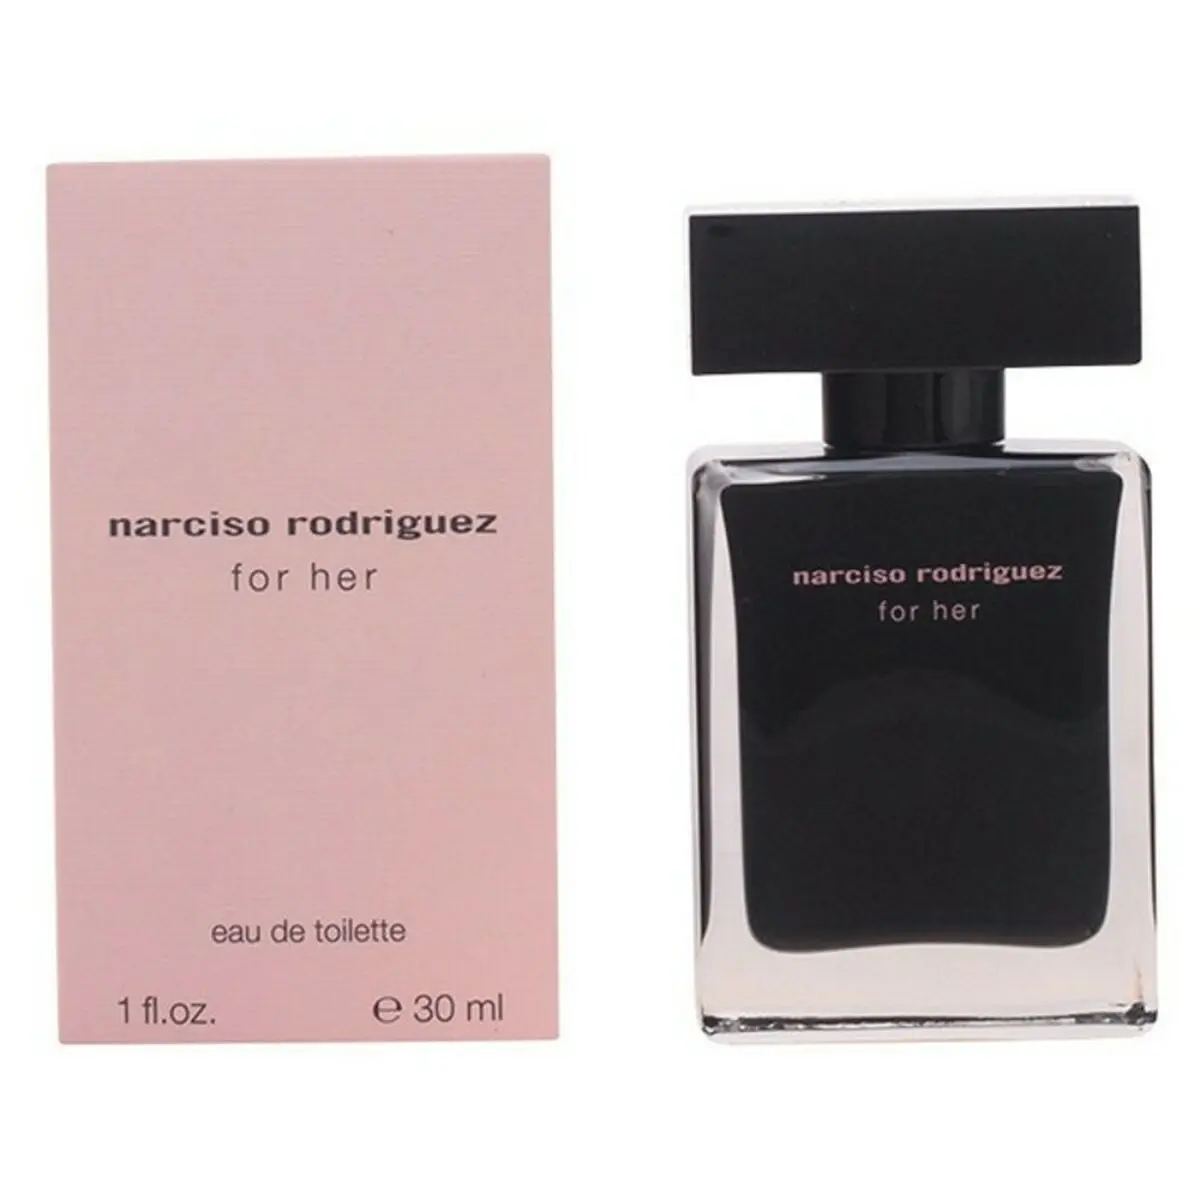 Profumo Donna Narciso Rodriguez For Her Narciso Rodriguez Narciso Rodriguez For Her EDT 50 ml (1 Unità)